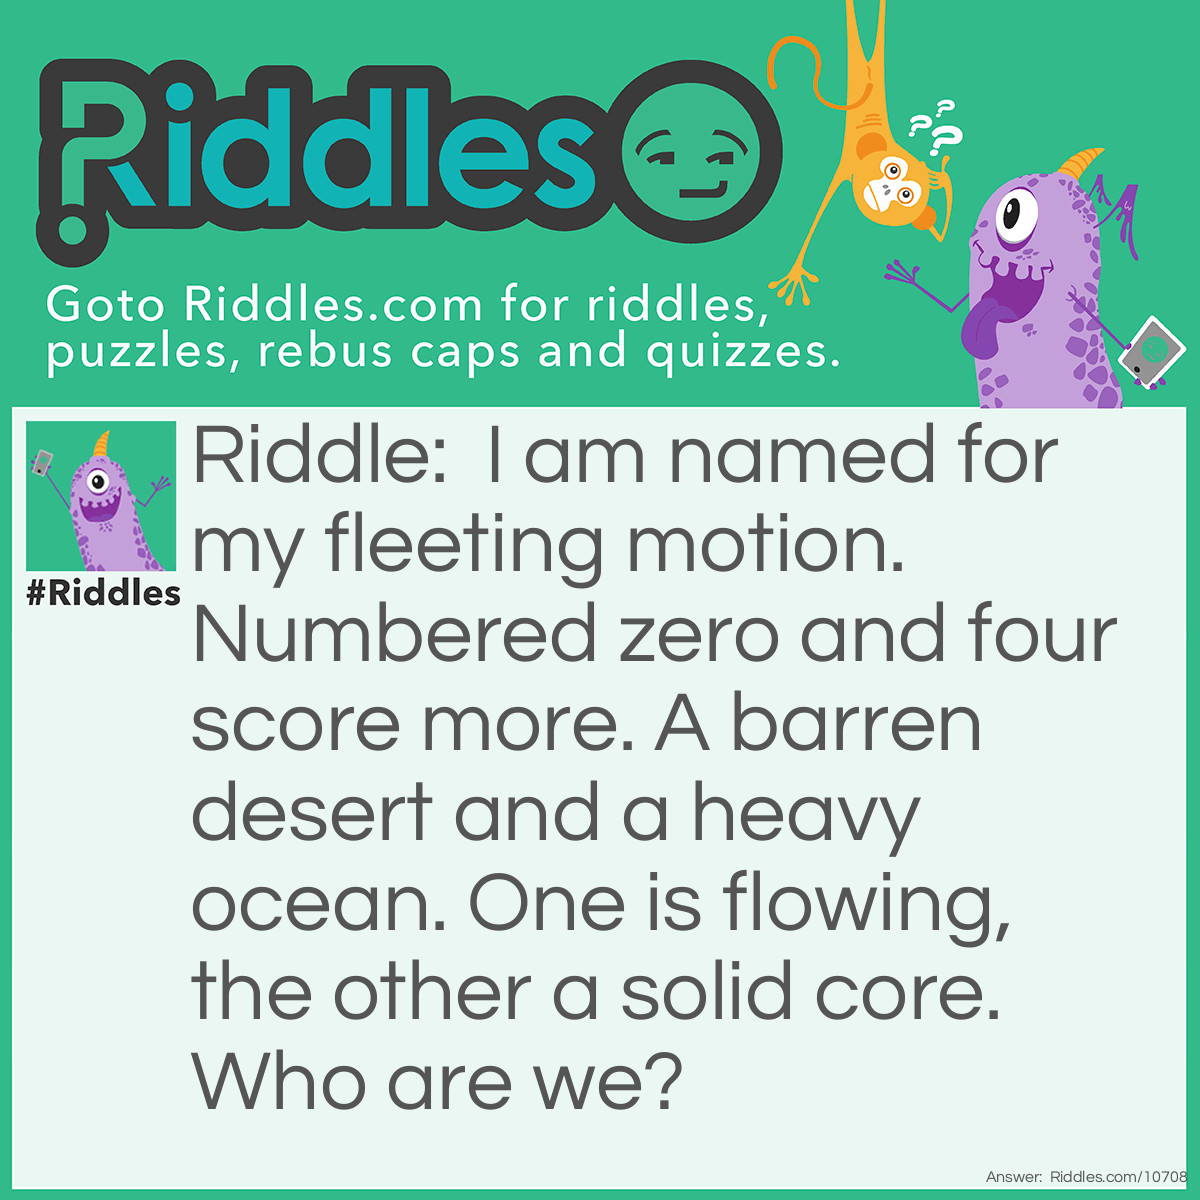 Riddle: I am named for my fleeting motion. Numbered zero and four score more. A barren desert and a heavy ocean. One is flowing, the other a solid core. Who are we? Answer: Mercury and mercury.